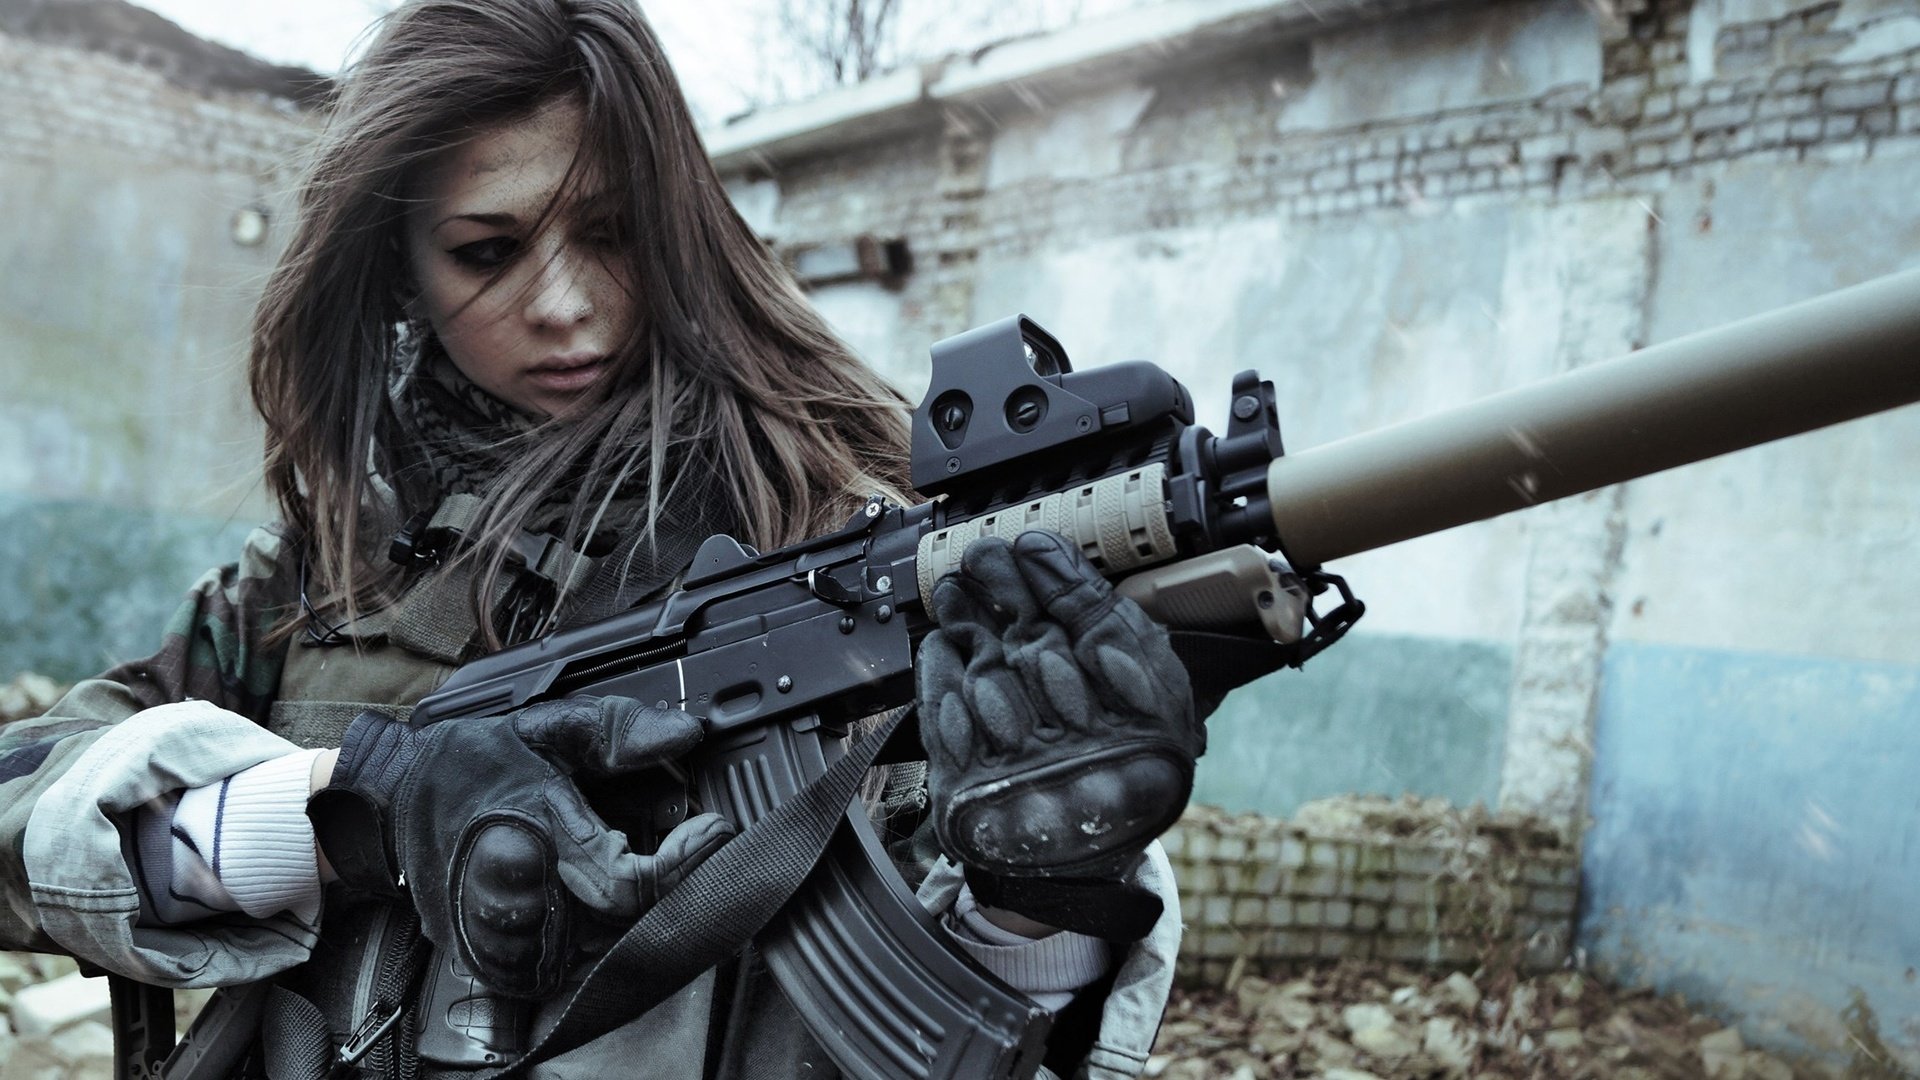 Free Download Girls With Guns Wallpaper Id226183 Full Hd 1080p For Pc